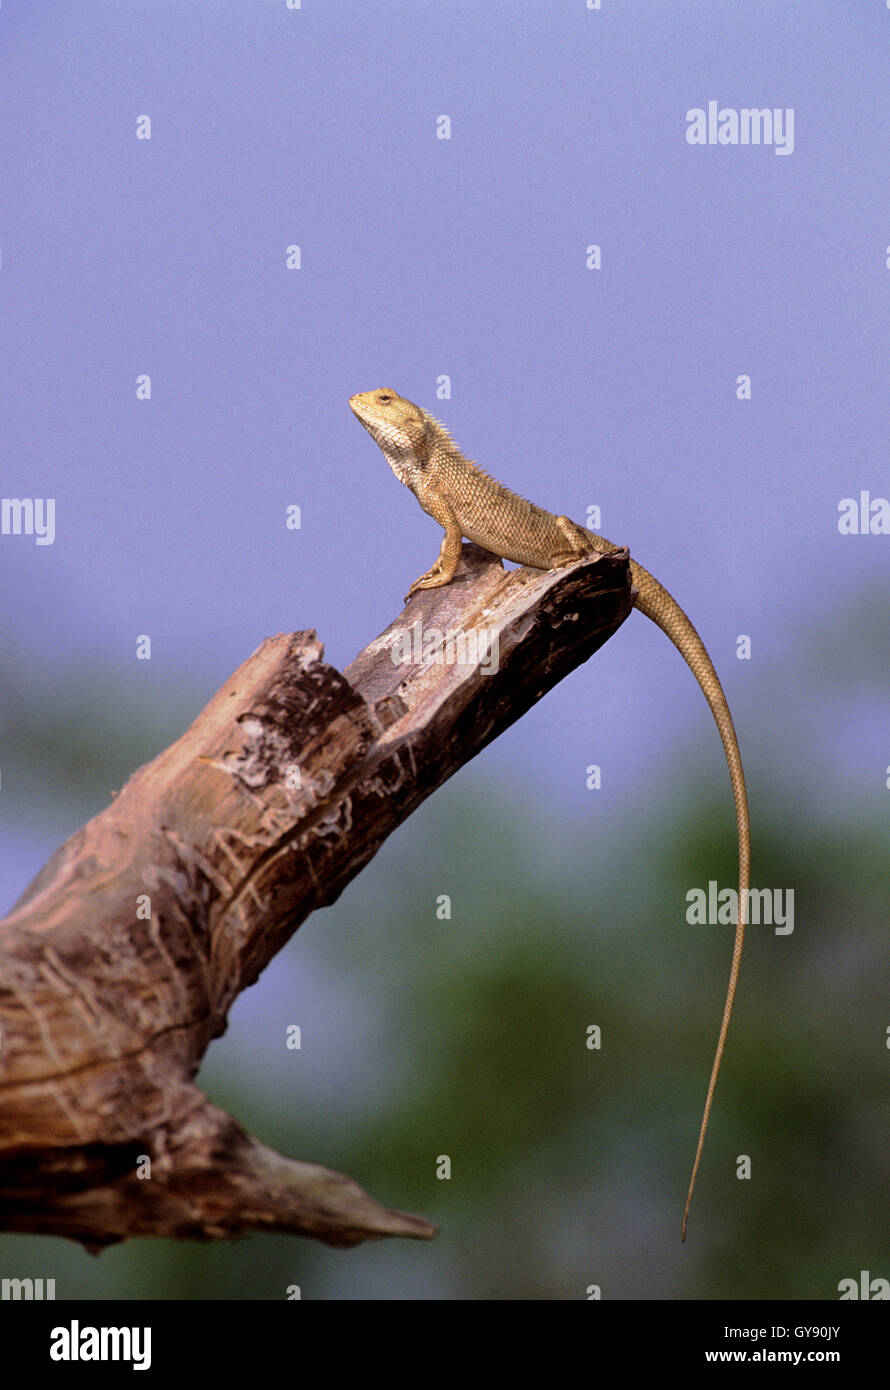 Indian Garden Lizard, Calotes versicolor, stands on branch bathing in early morning sunshine, Bharatpur, India Stock Photo